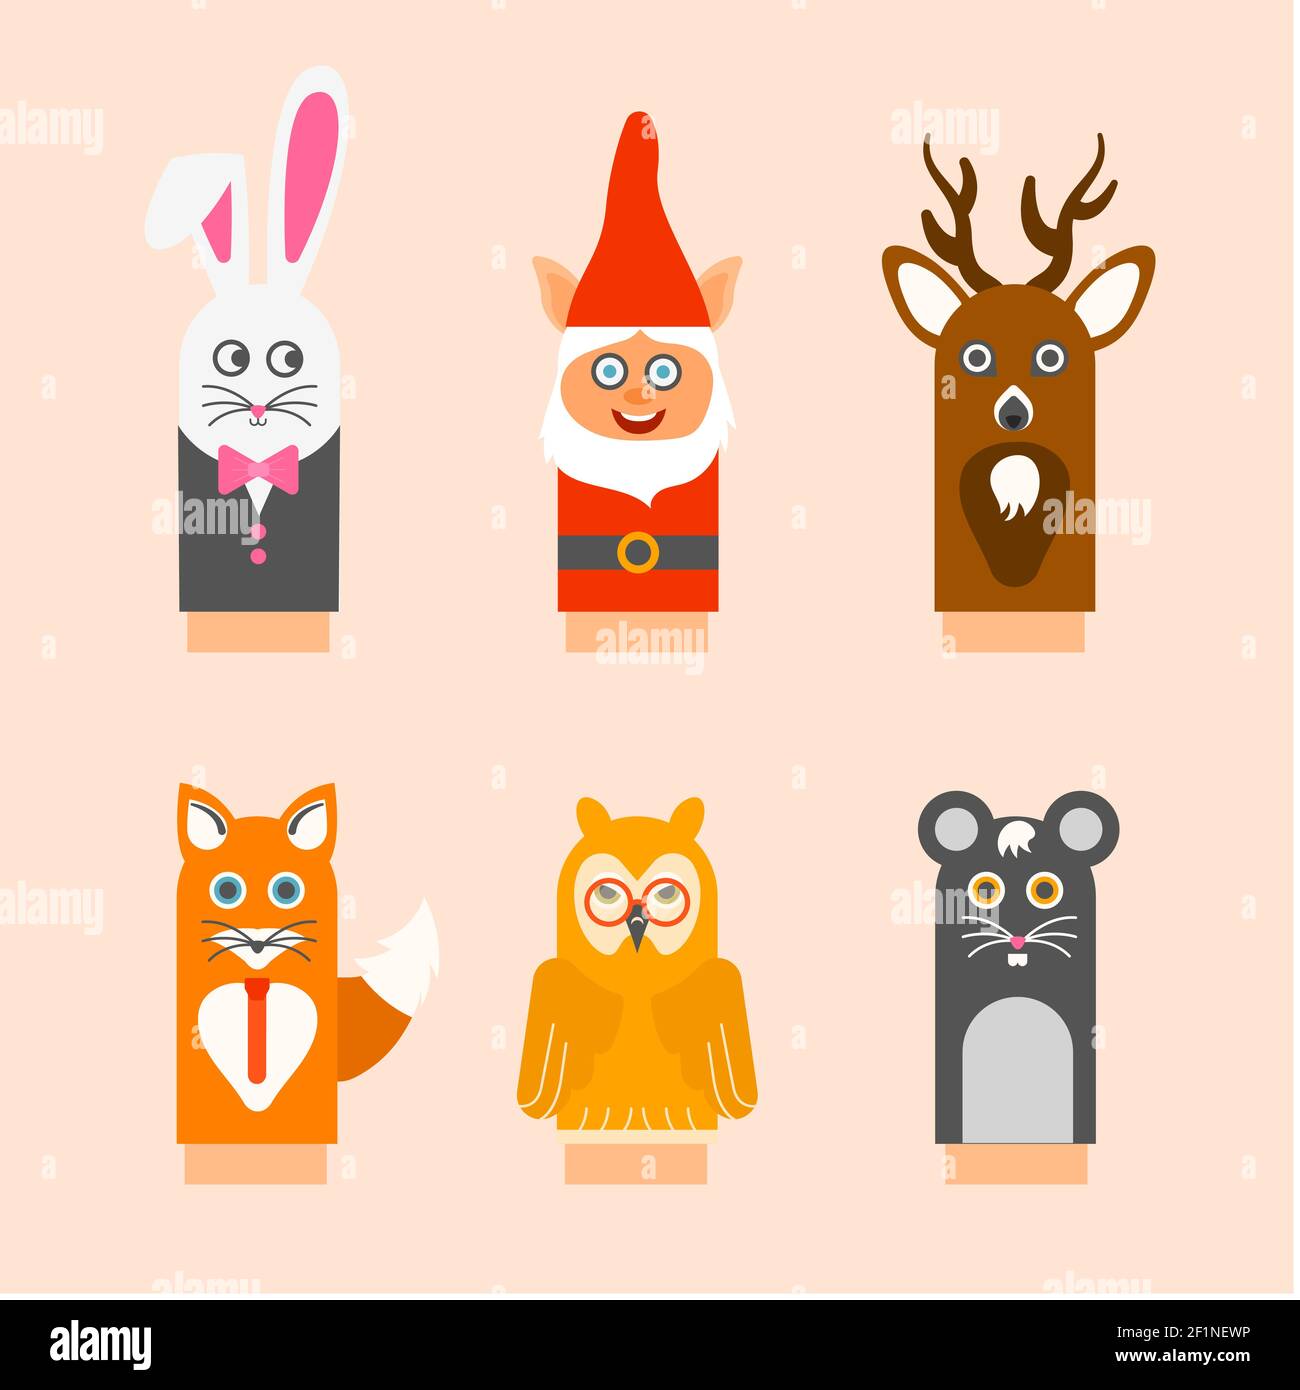 Organic flat design hand puppets collection Vector illustration. Stock Vector